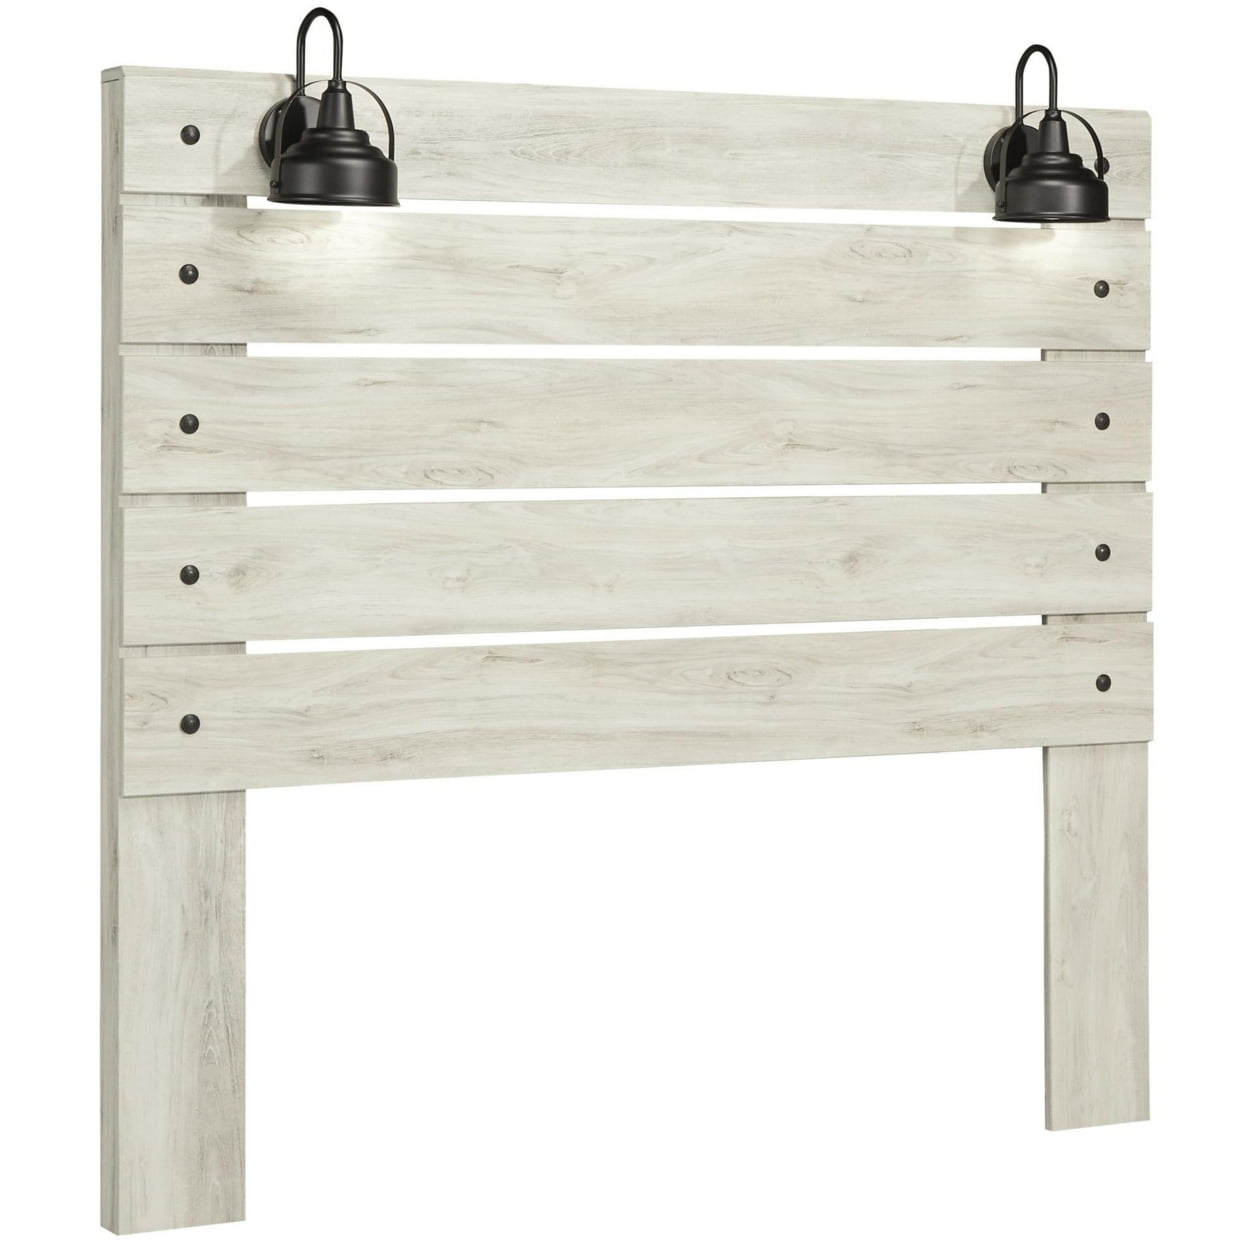 Picture of Benjara BM213292 Transitional Wooden Queen Size Panel Headboard with Slated Design & Lamp - White